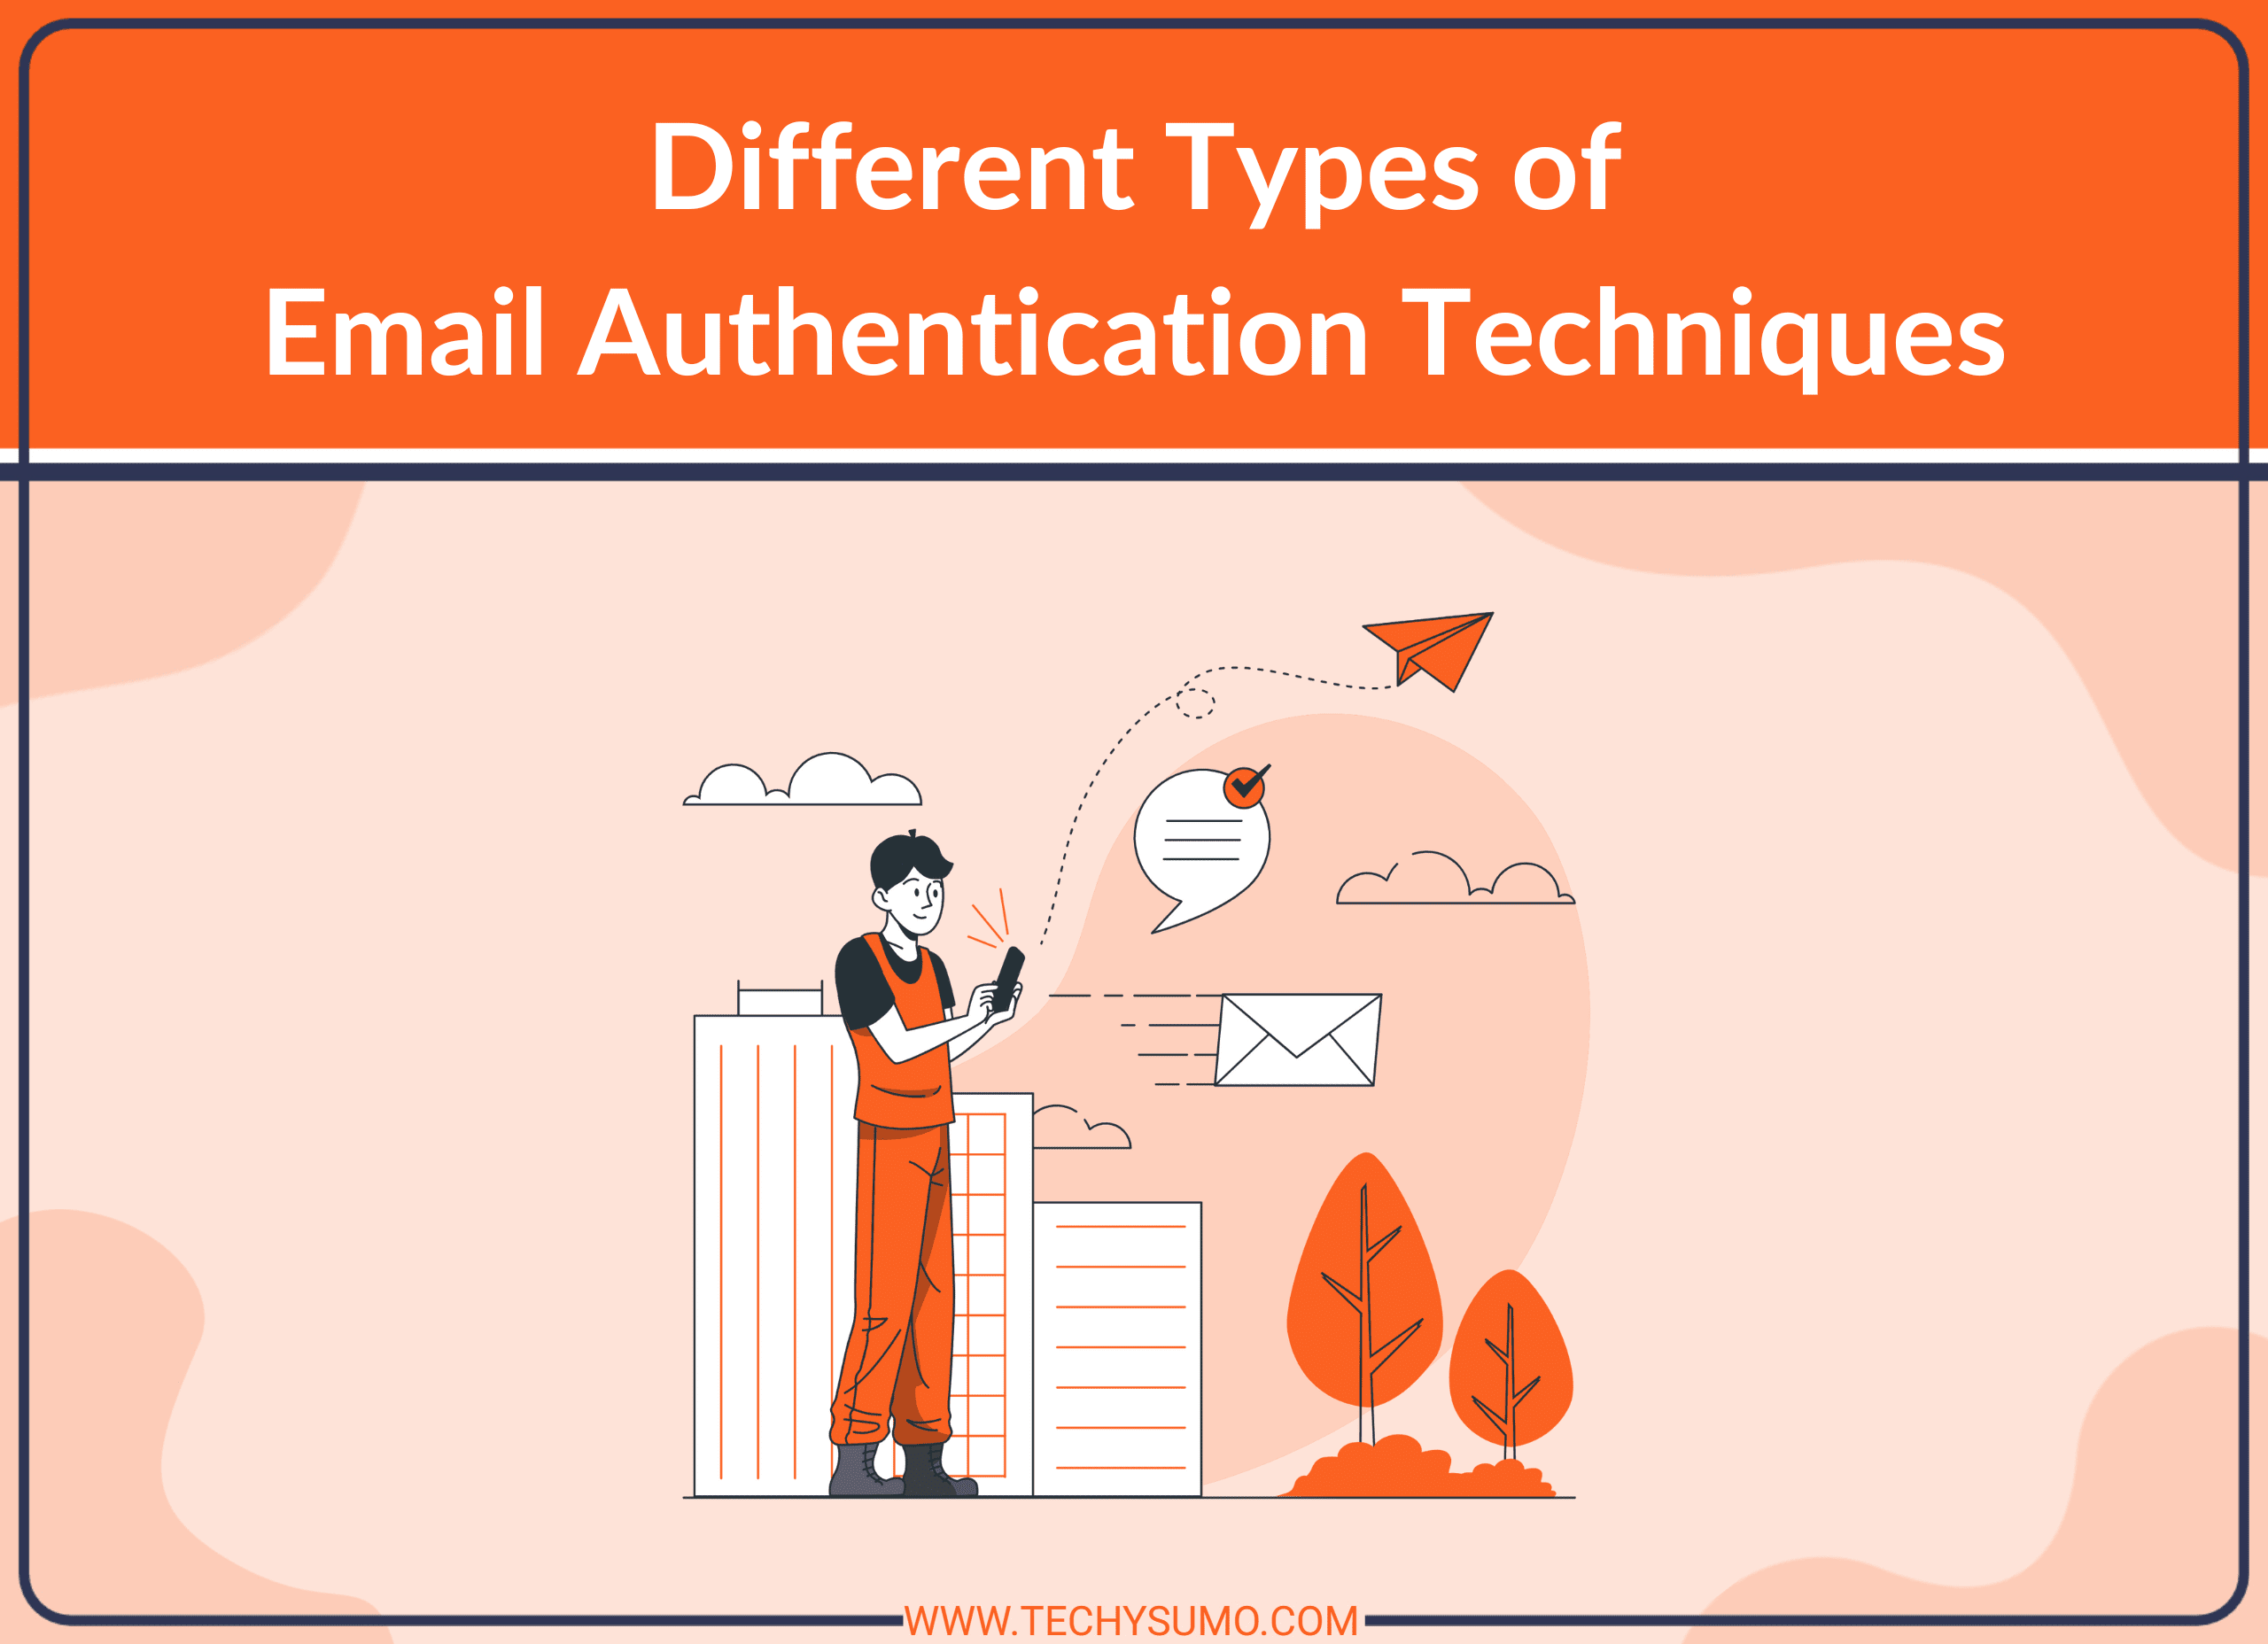 Different Types of Email Authentication Techniques